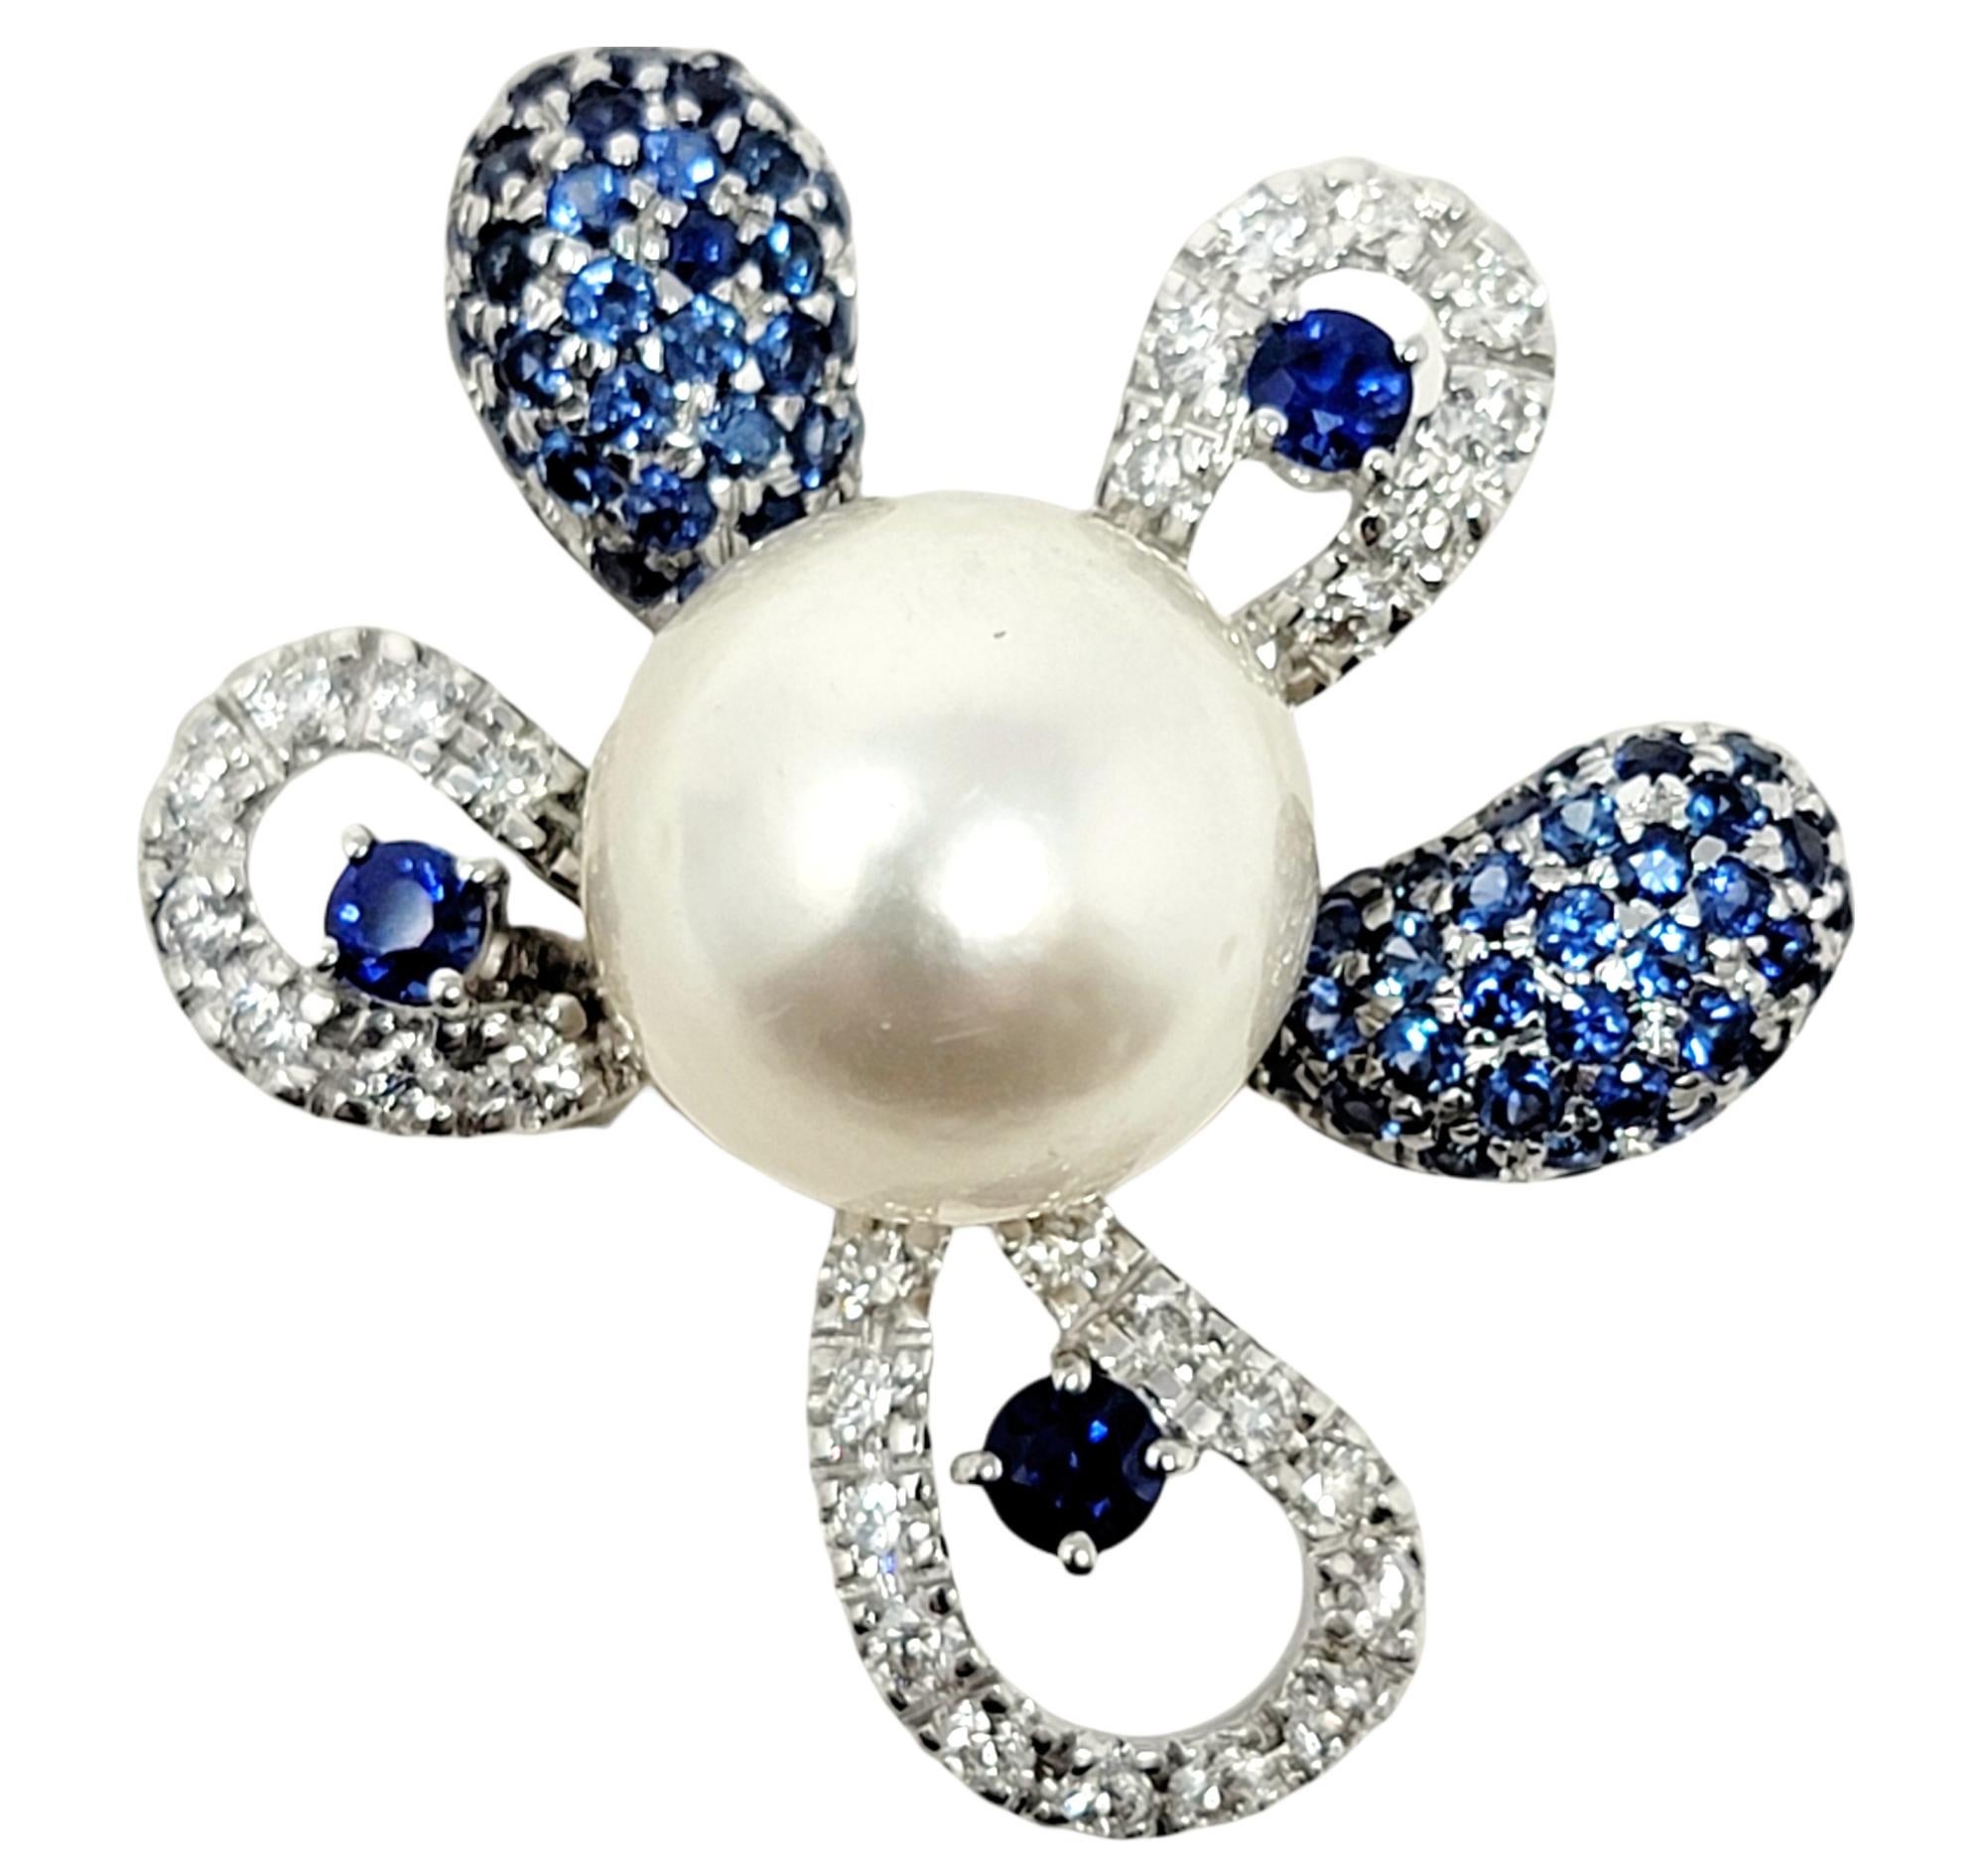 Ring size: 7.75

This marvelous pearl, diamond and sapphire cocktail ring is an absolute stunner!  Whimsical yet luxurious, this sparkling ring offers vibrant color, a bold design and incredible dimension. The sizeable cocktail style ring features a